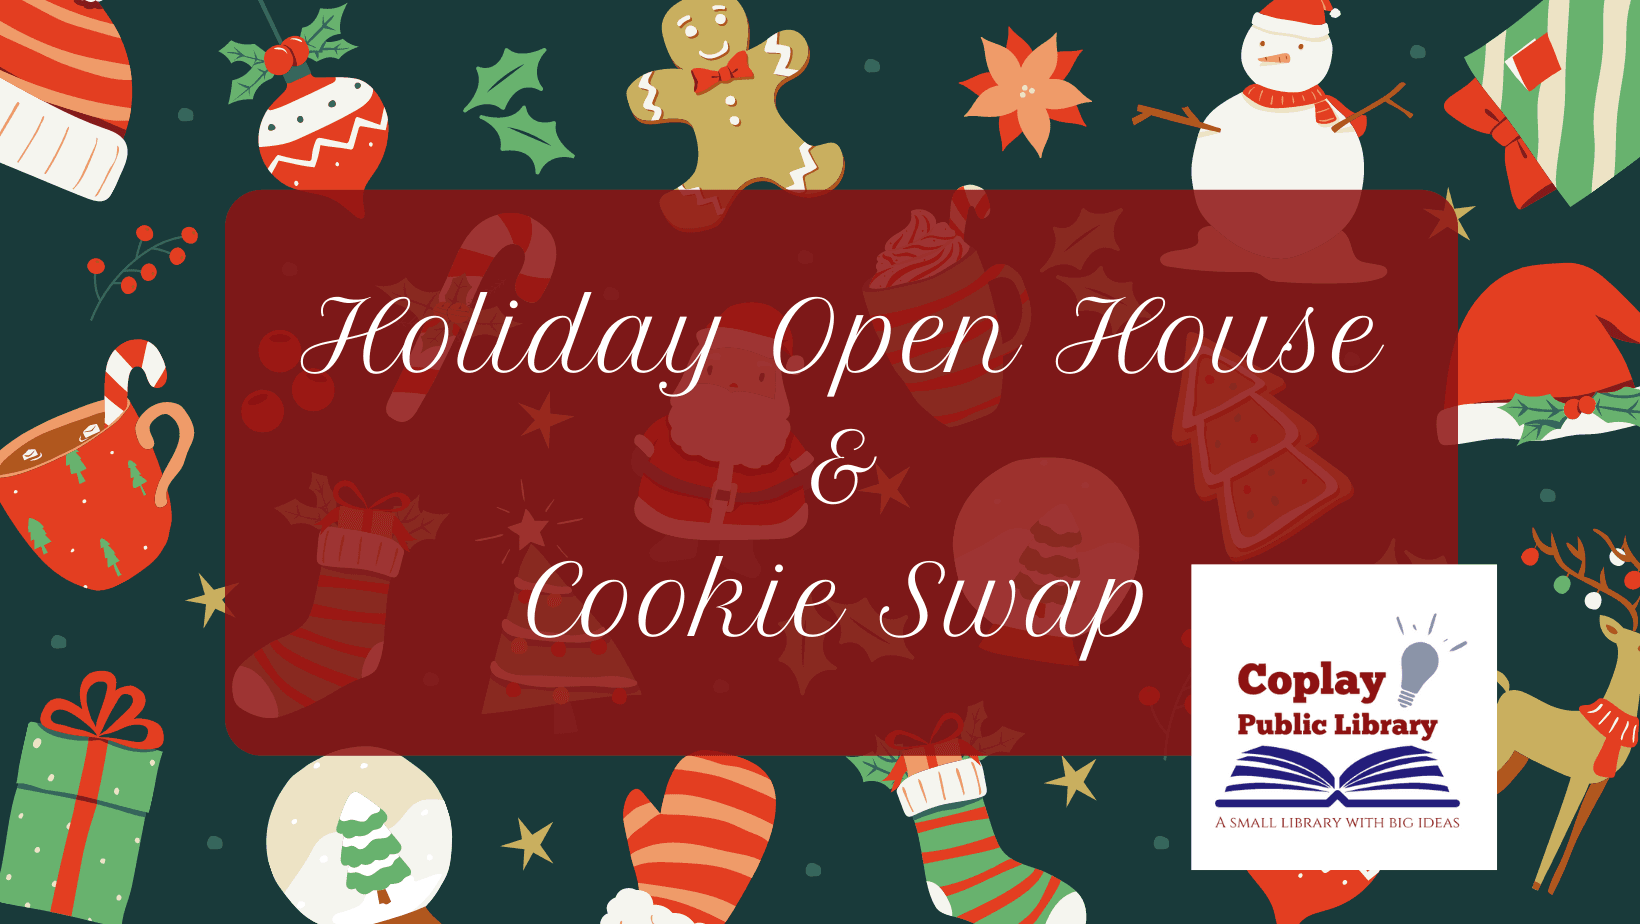 Cartoon images of ornaments, snow globes, gifts, hot chocolate, snowmen, etc. underscore the words "Holiday Open House & Cookie Swap" and the Coplay Public Library logo.